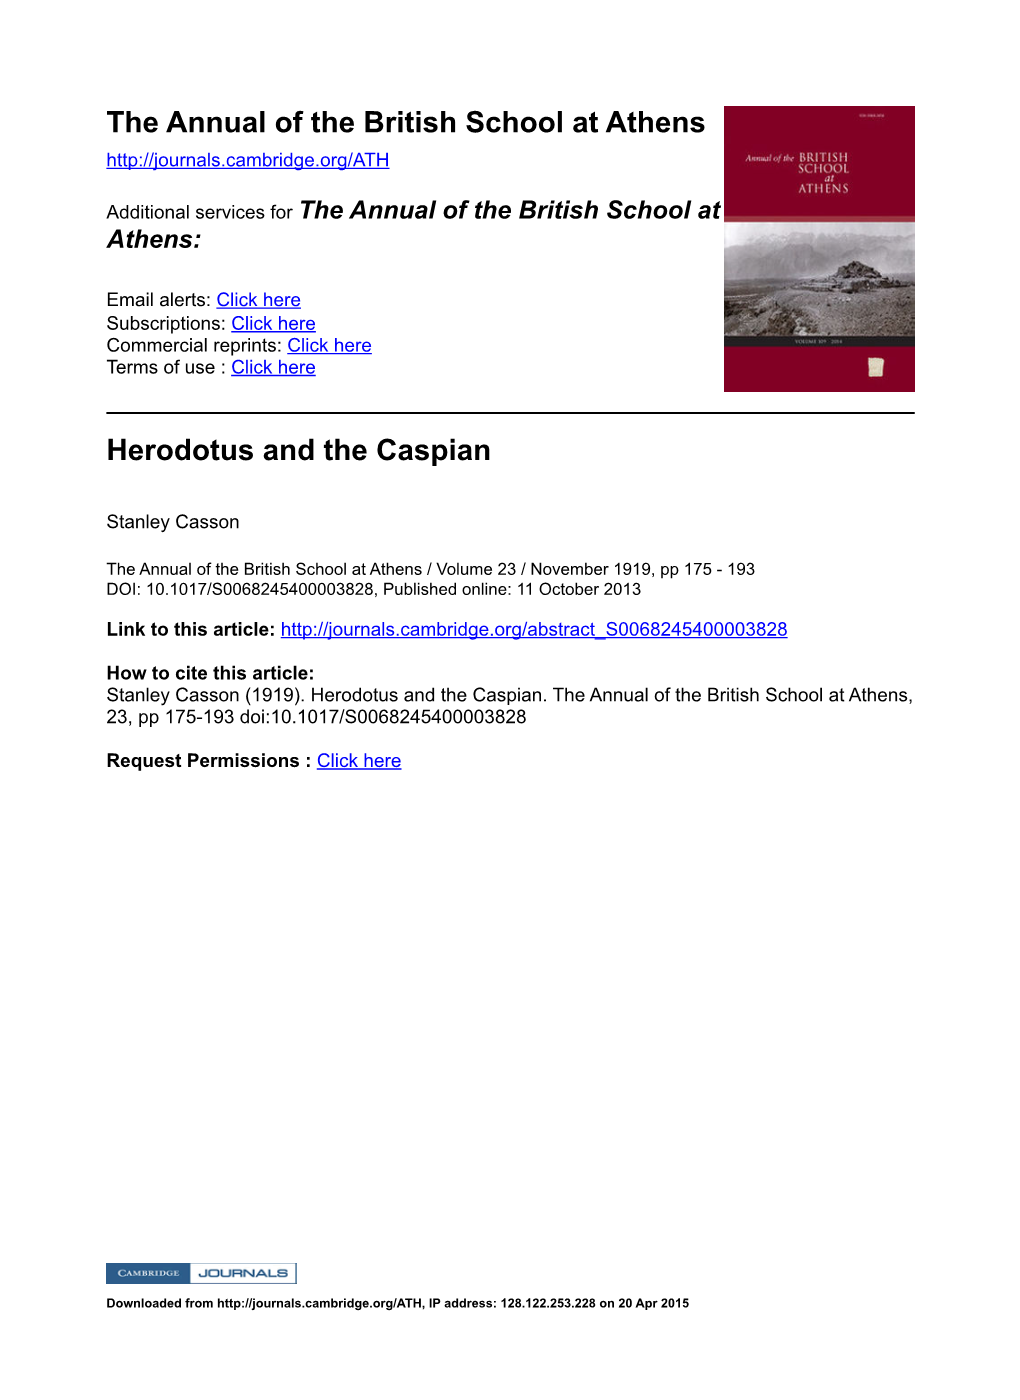 The Annual of the British School at Athens Herodotus and the Caspian